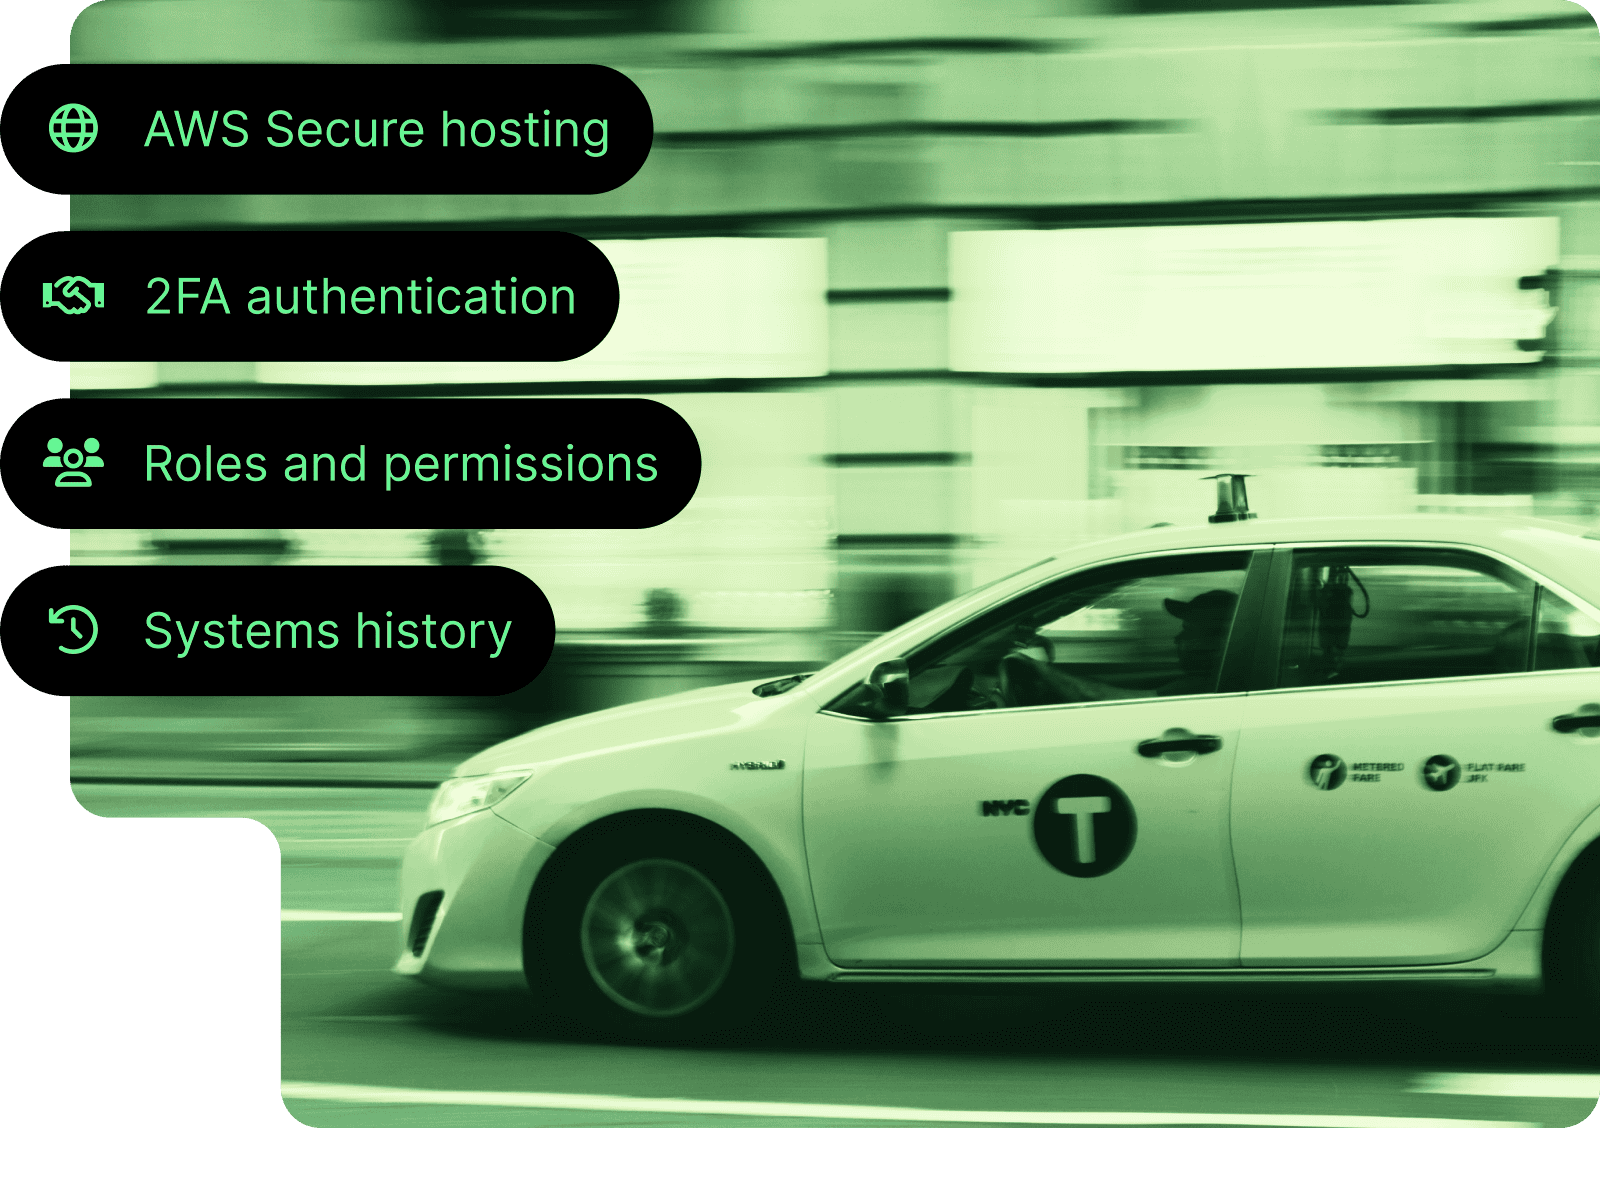 A taxi driving with security features listed